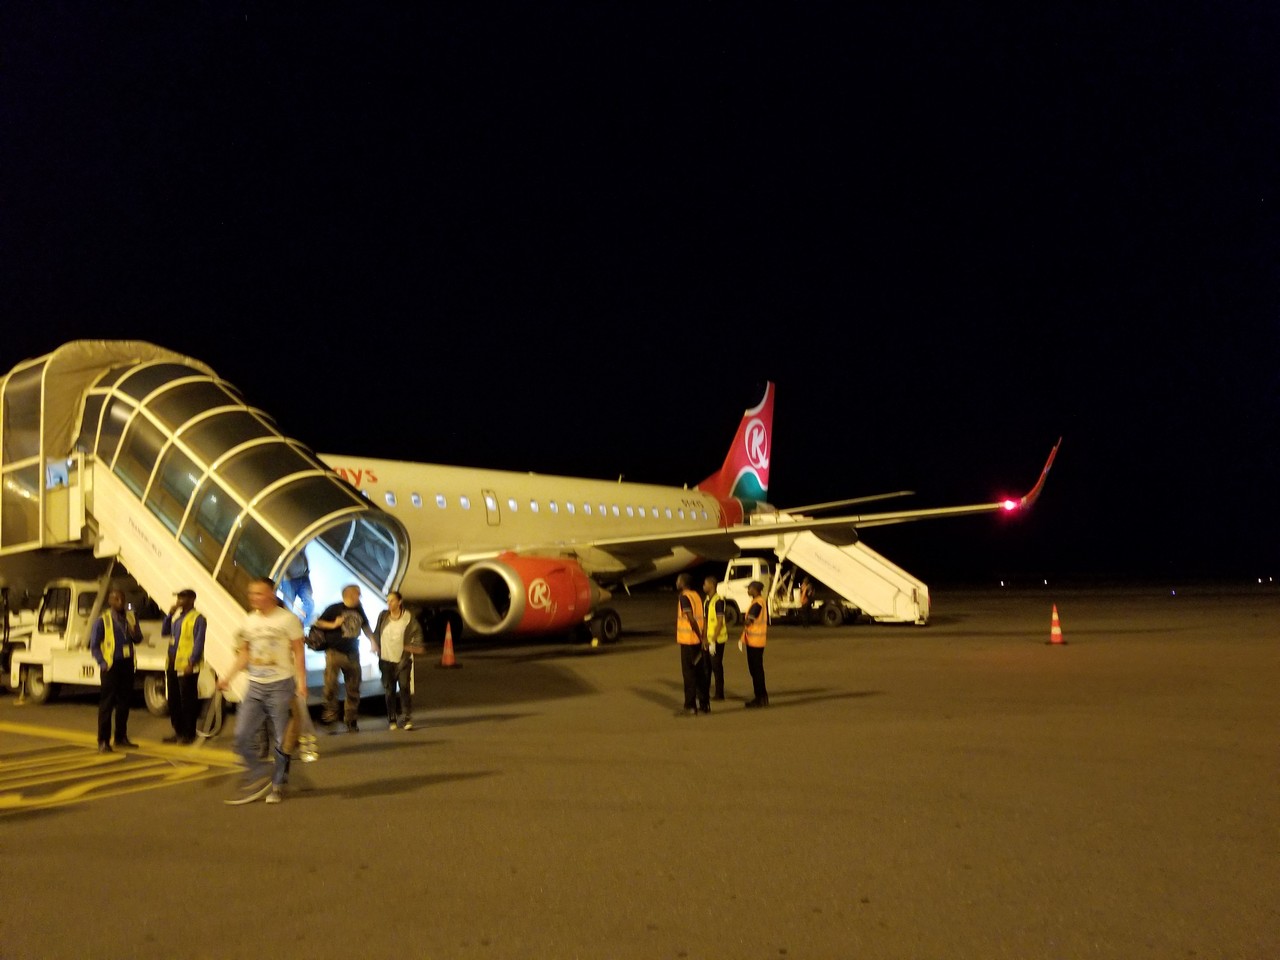 people boarding an airplane at night